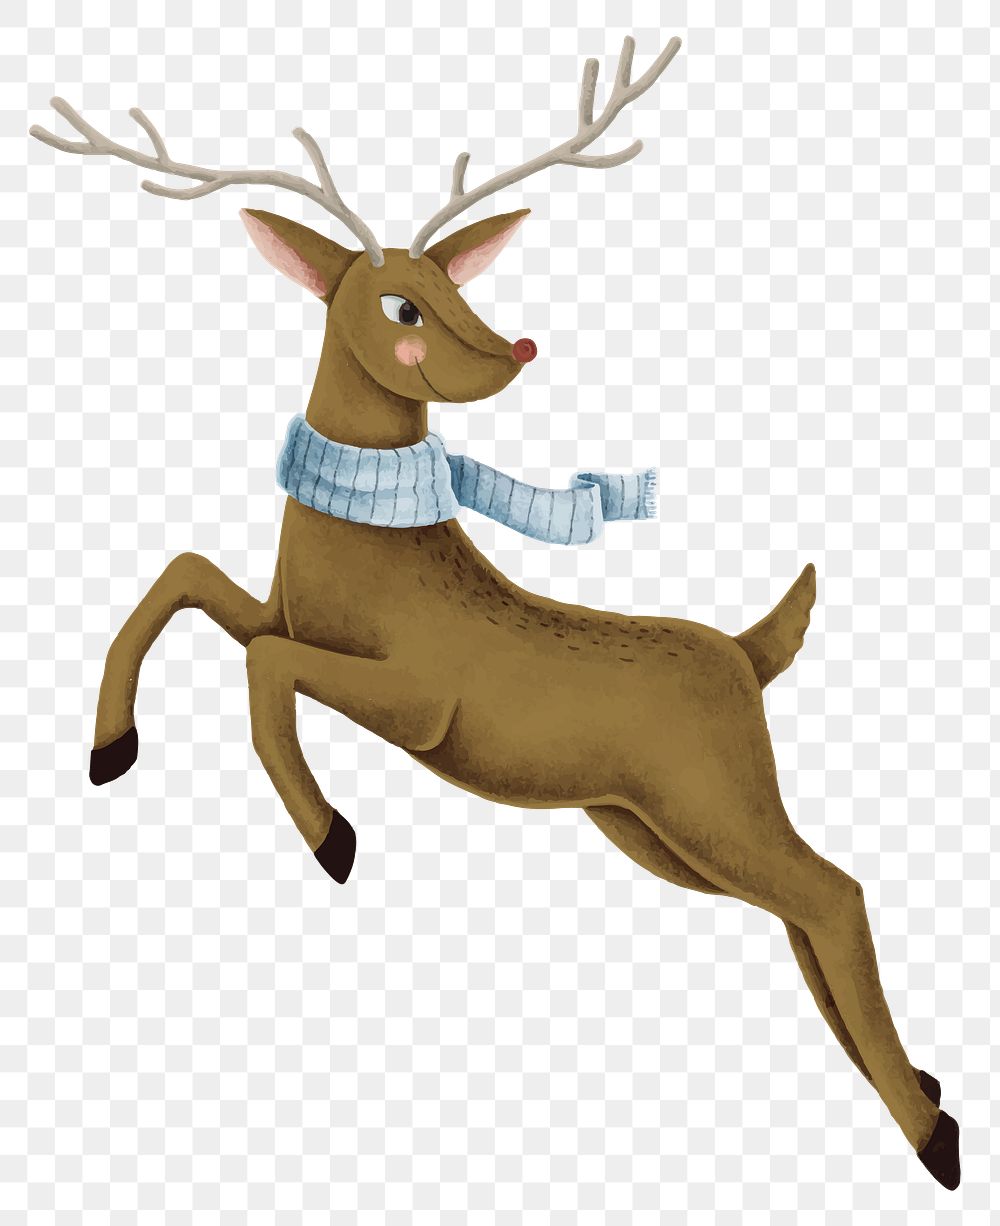 Cute rudolph with scarf png sticker drawing